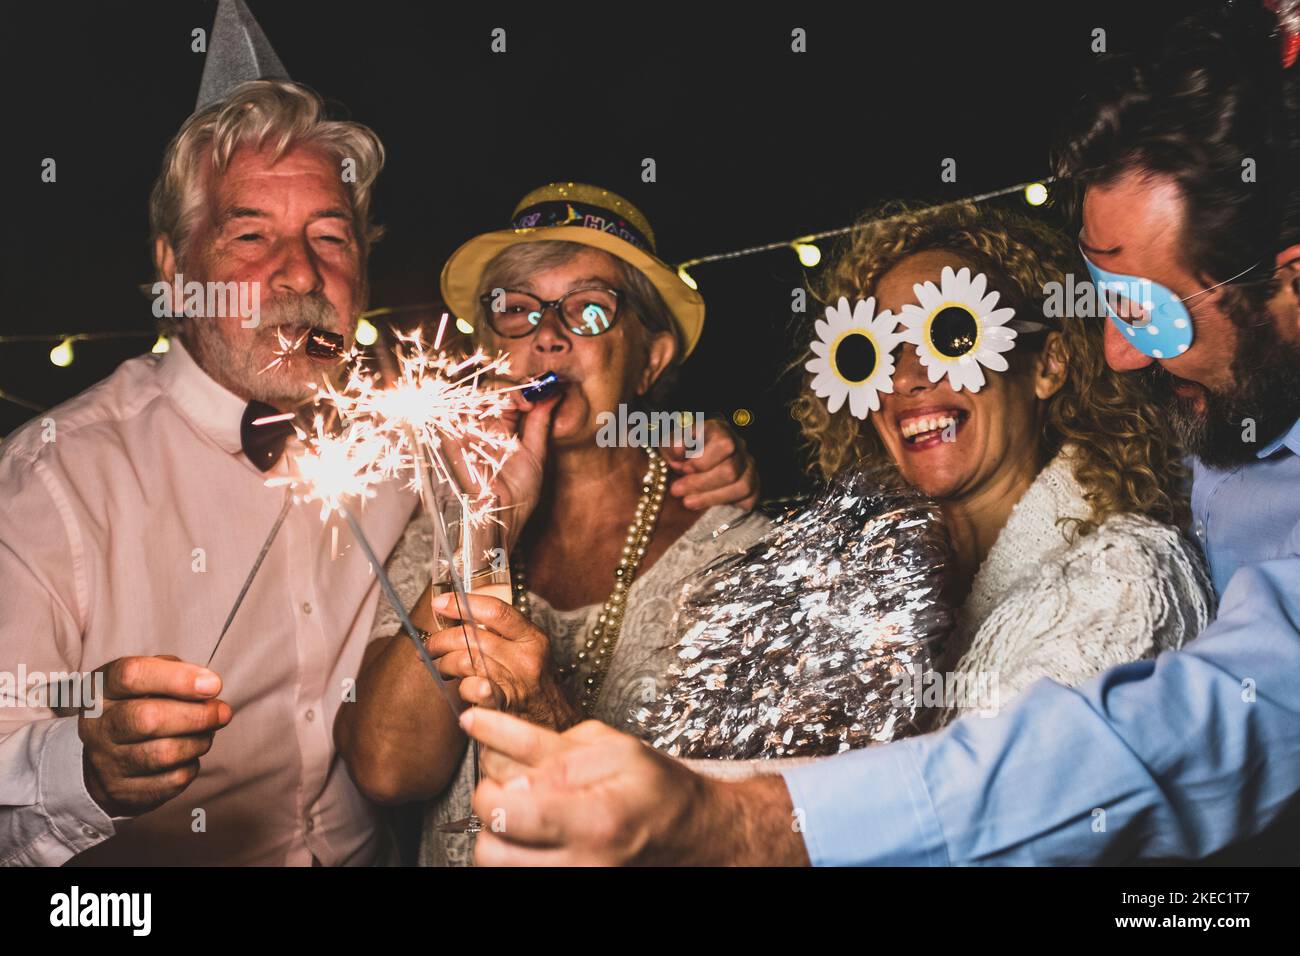 group of people having fun and enjoying new year night together celebrating with sparklers and funny accessories - happy lifestyle Stock Photo